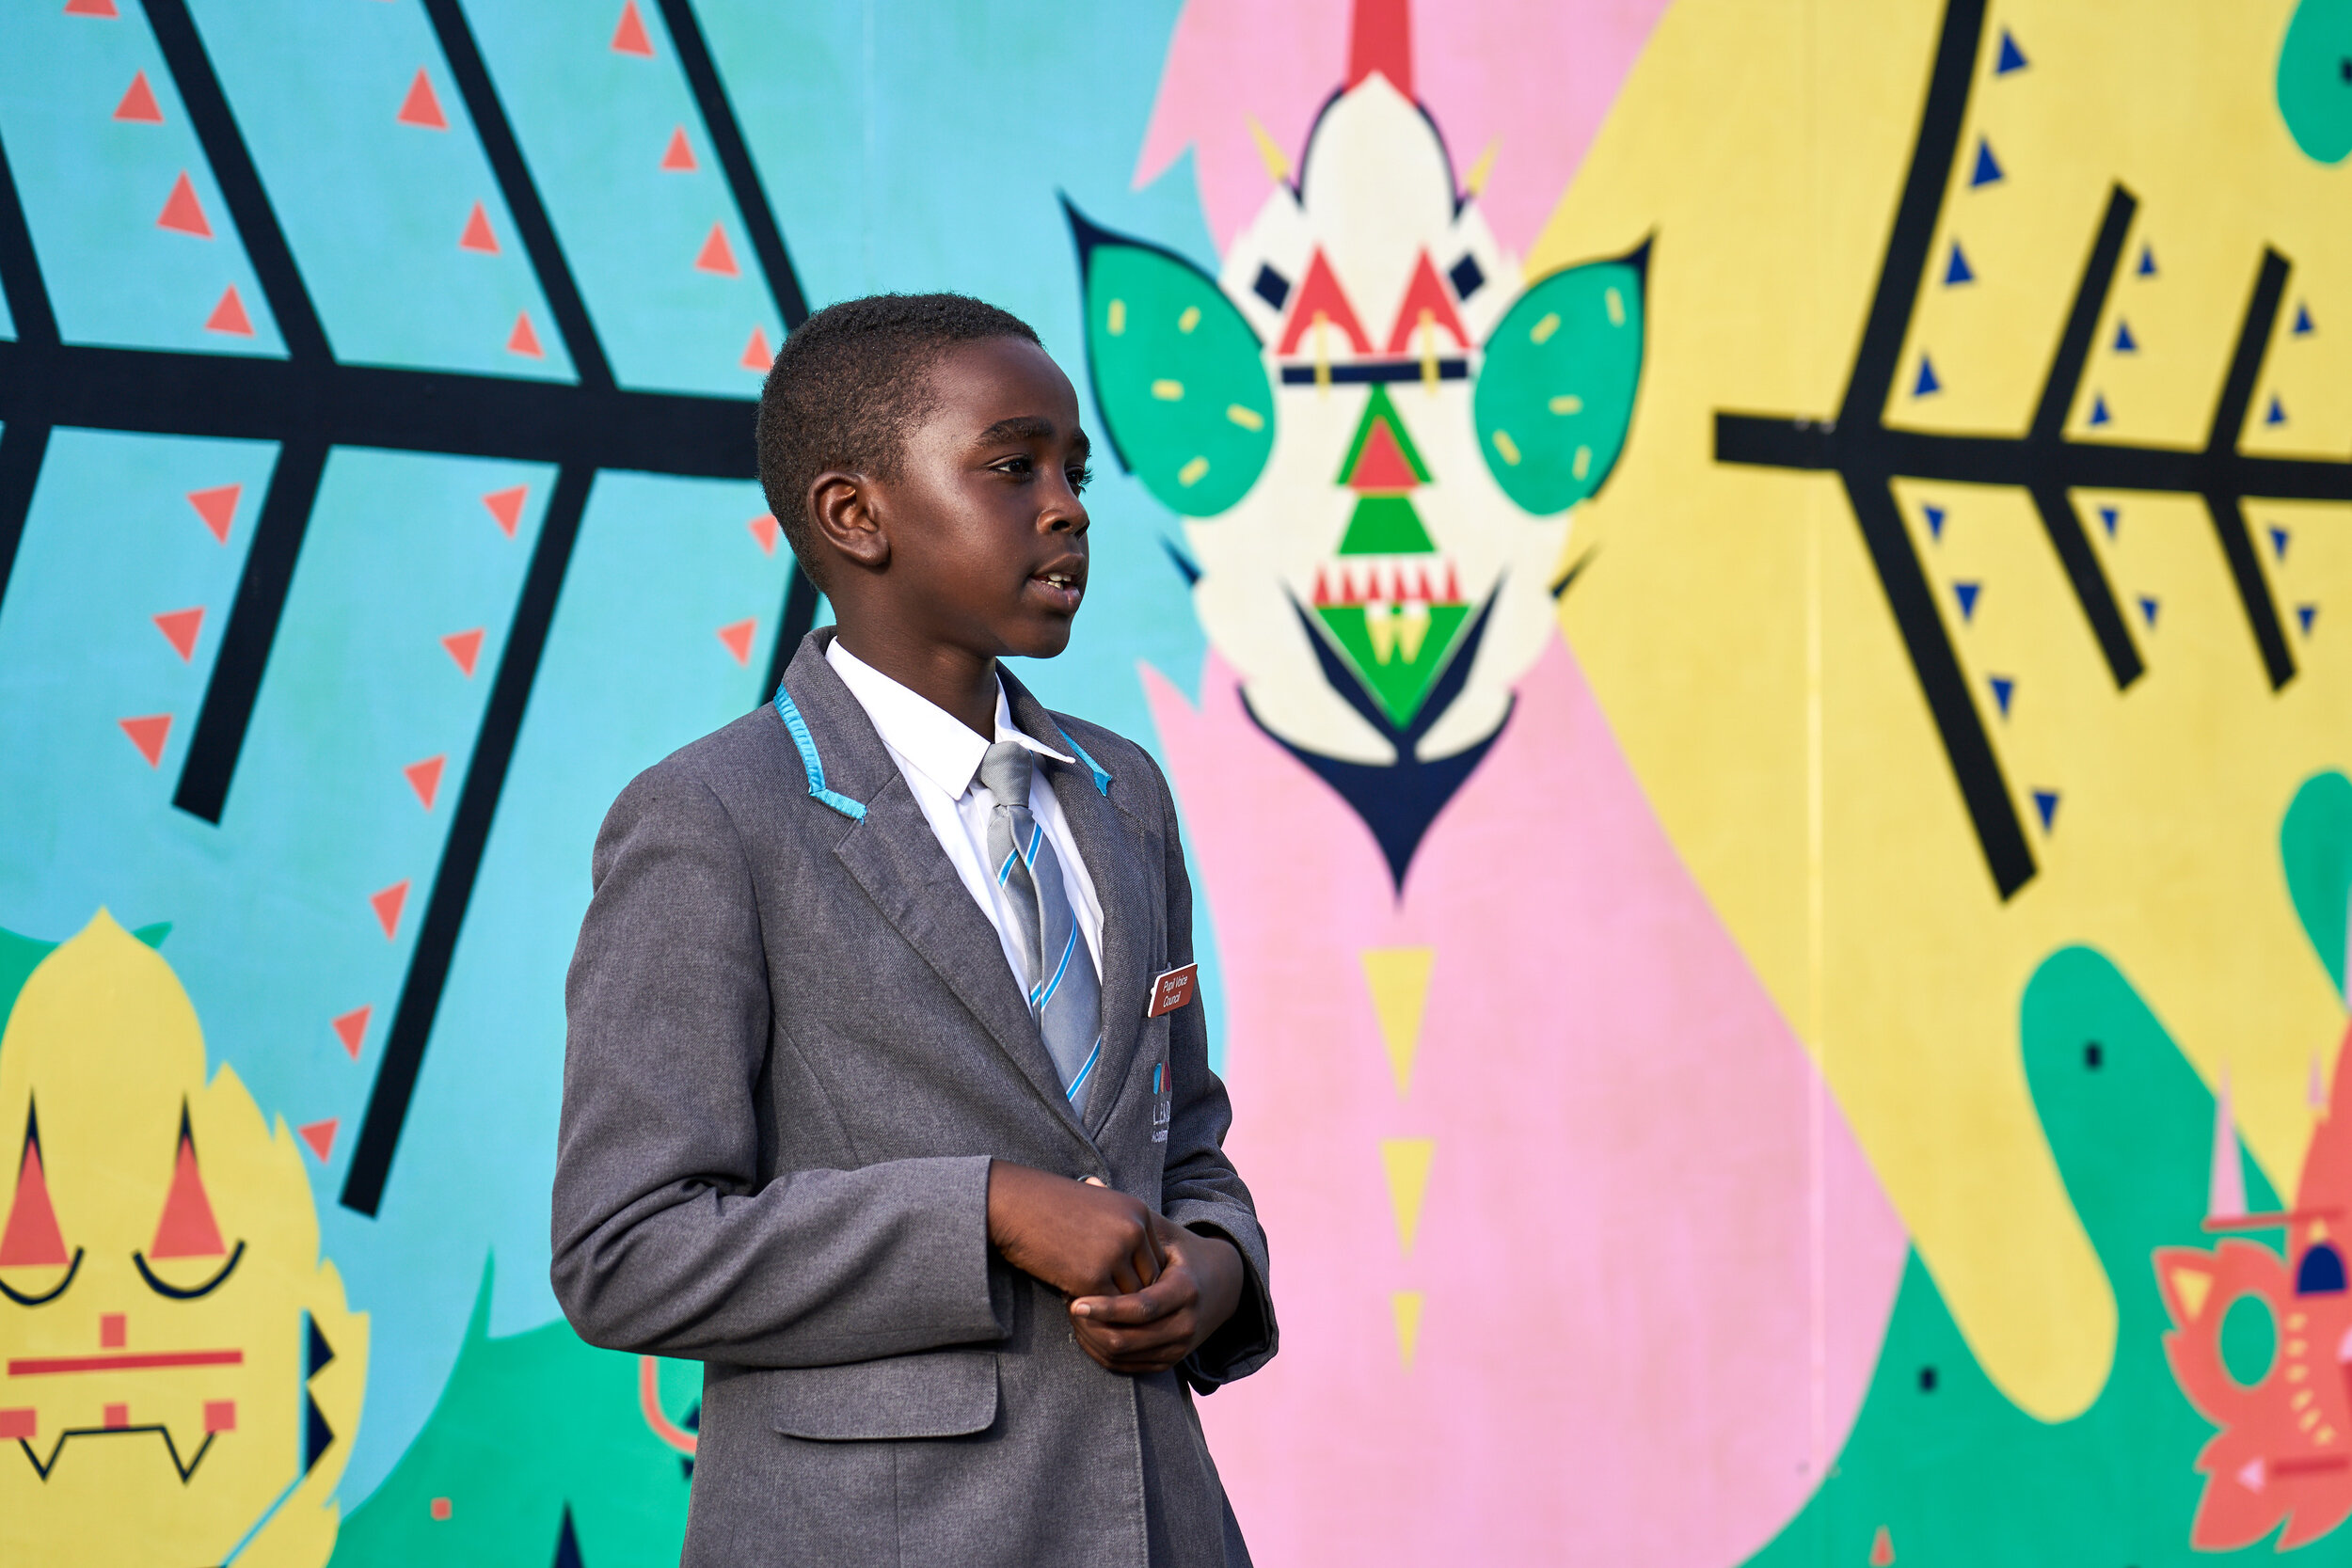  One of the pupils from Edna G Olds Academy, speaking at the project launch event, standing in front of the first mural 